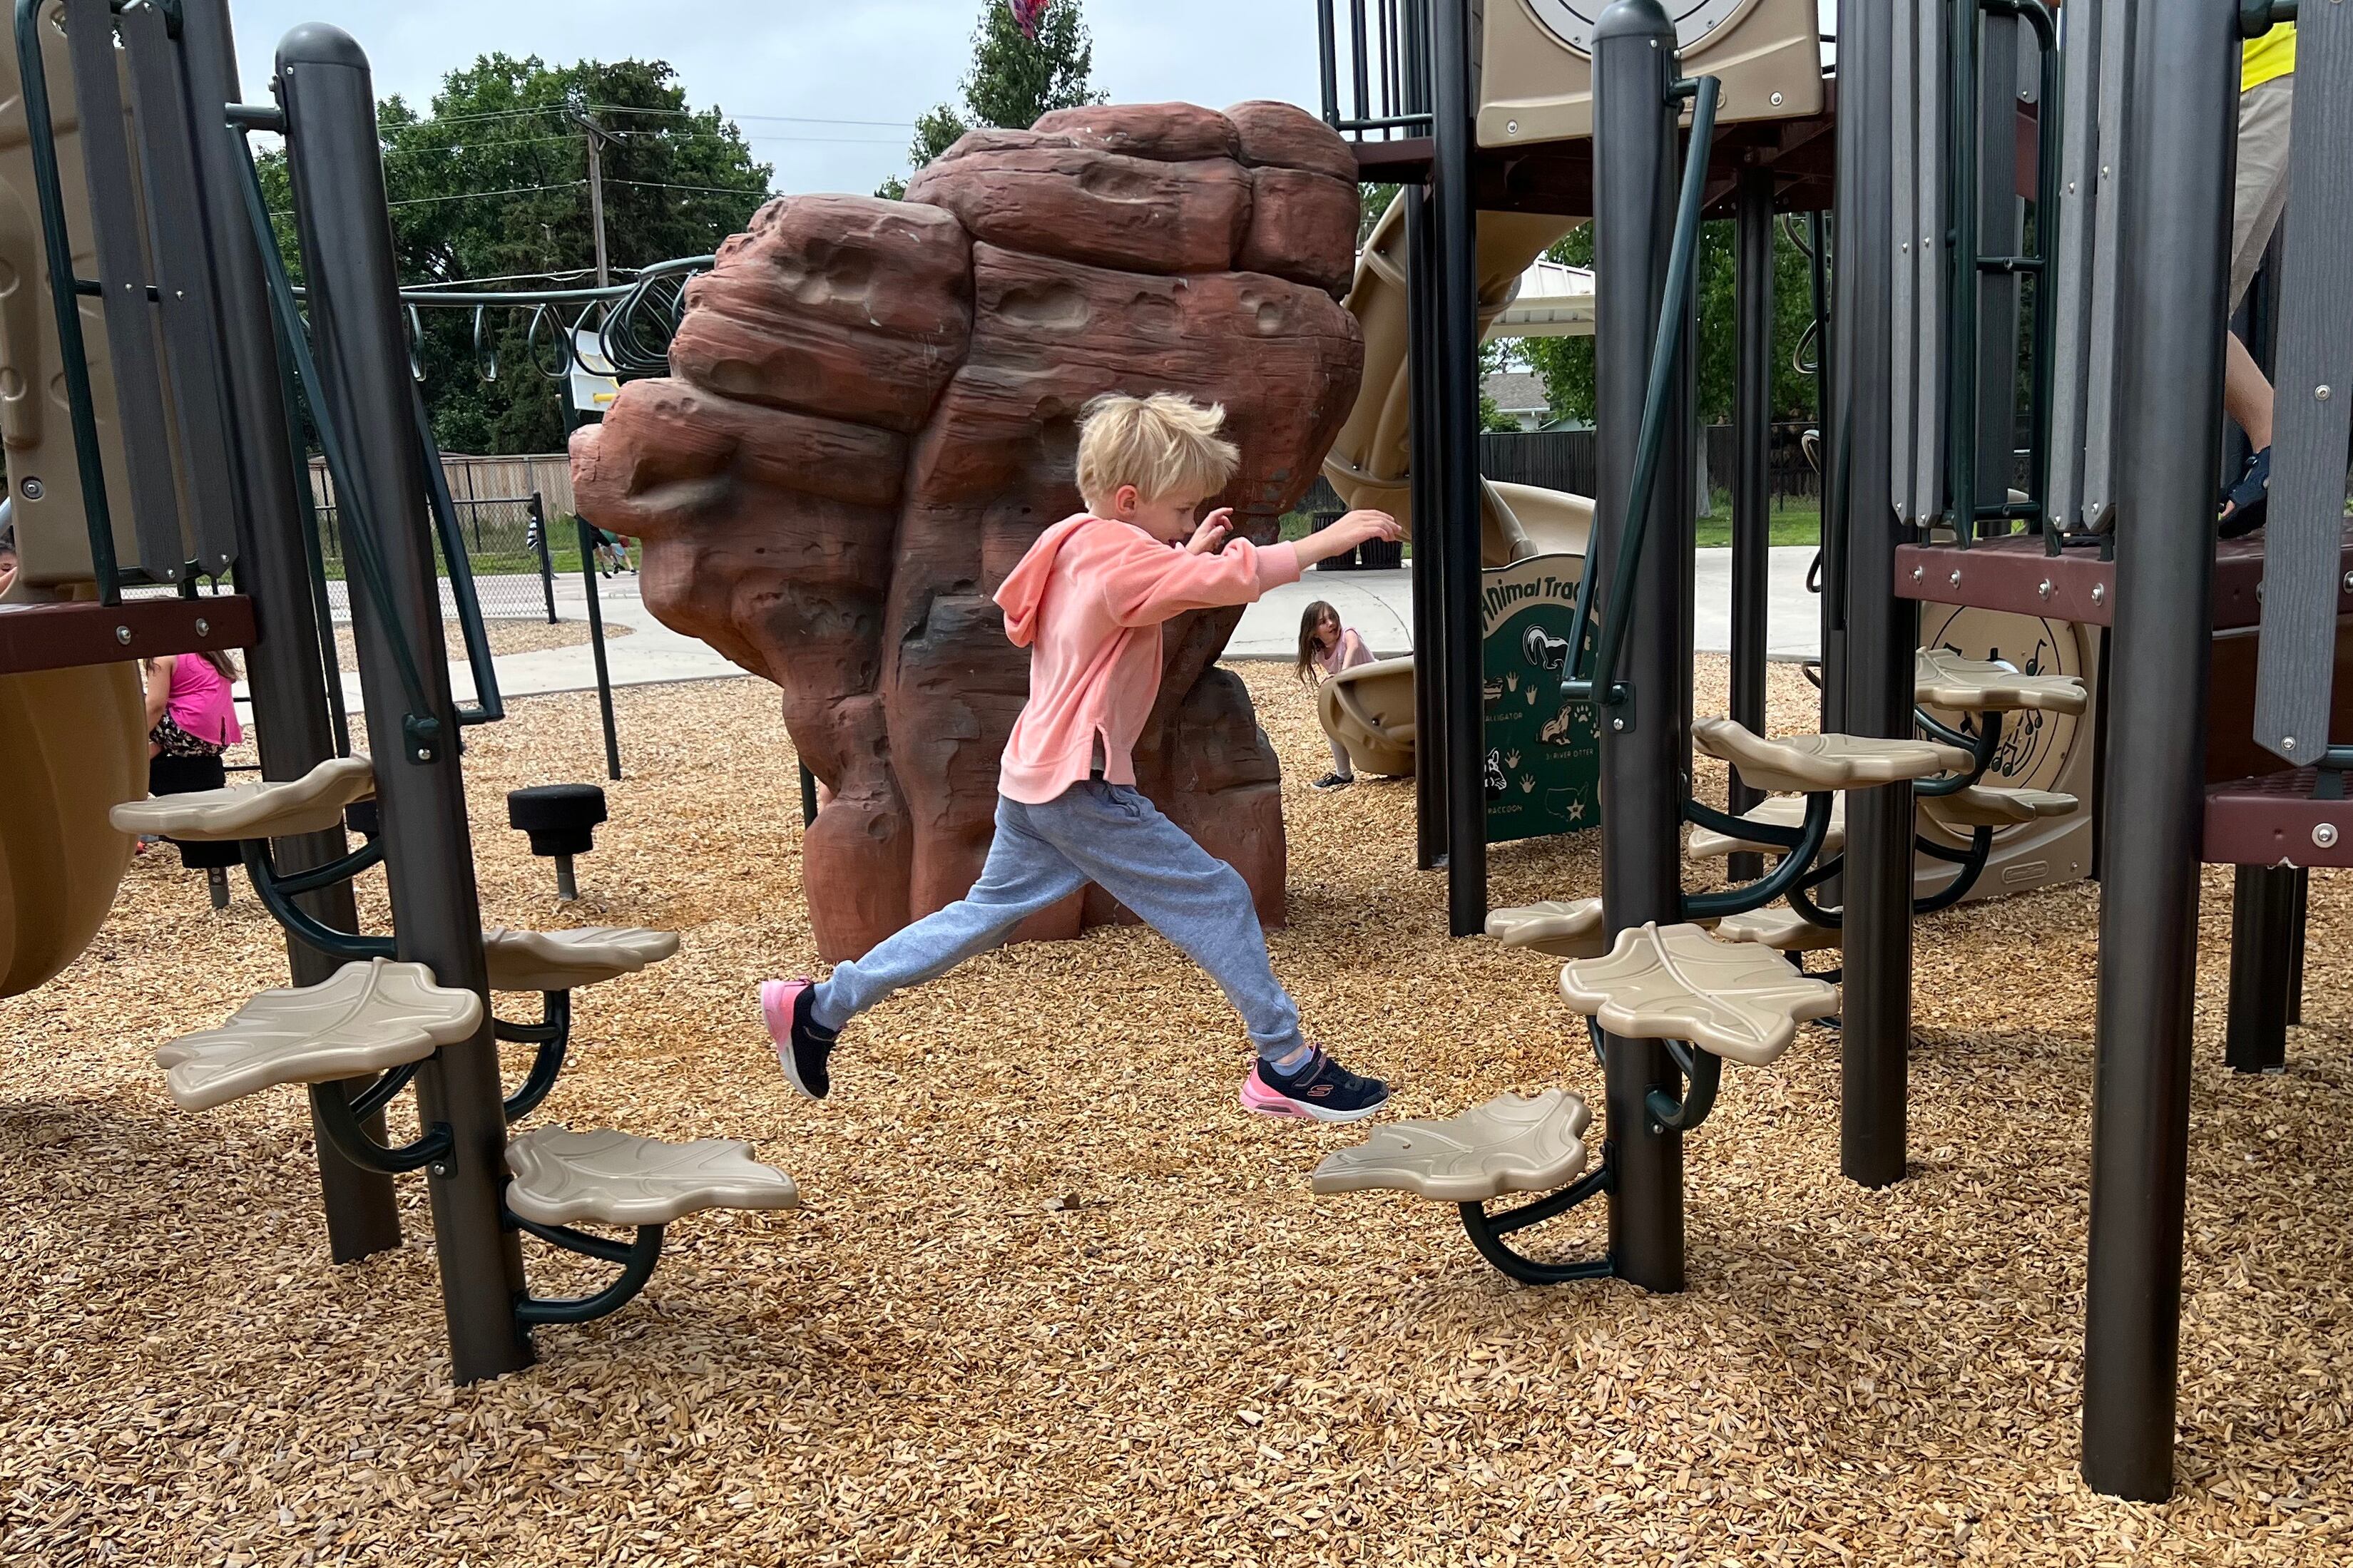 A third grade child in a peach-colored shirt leaps from one plastic toadstool to another on an outdoor school playground.